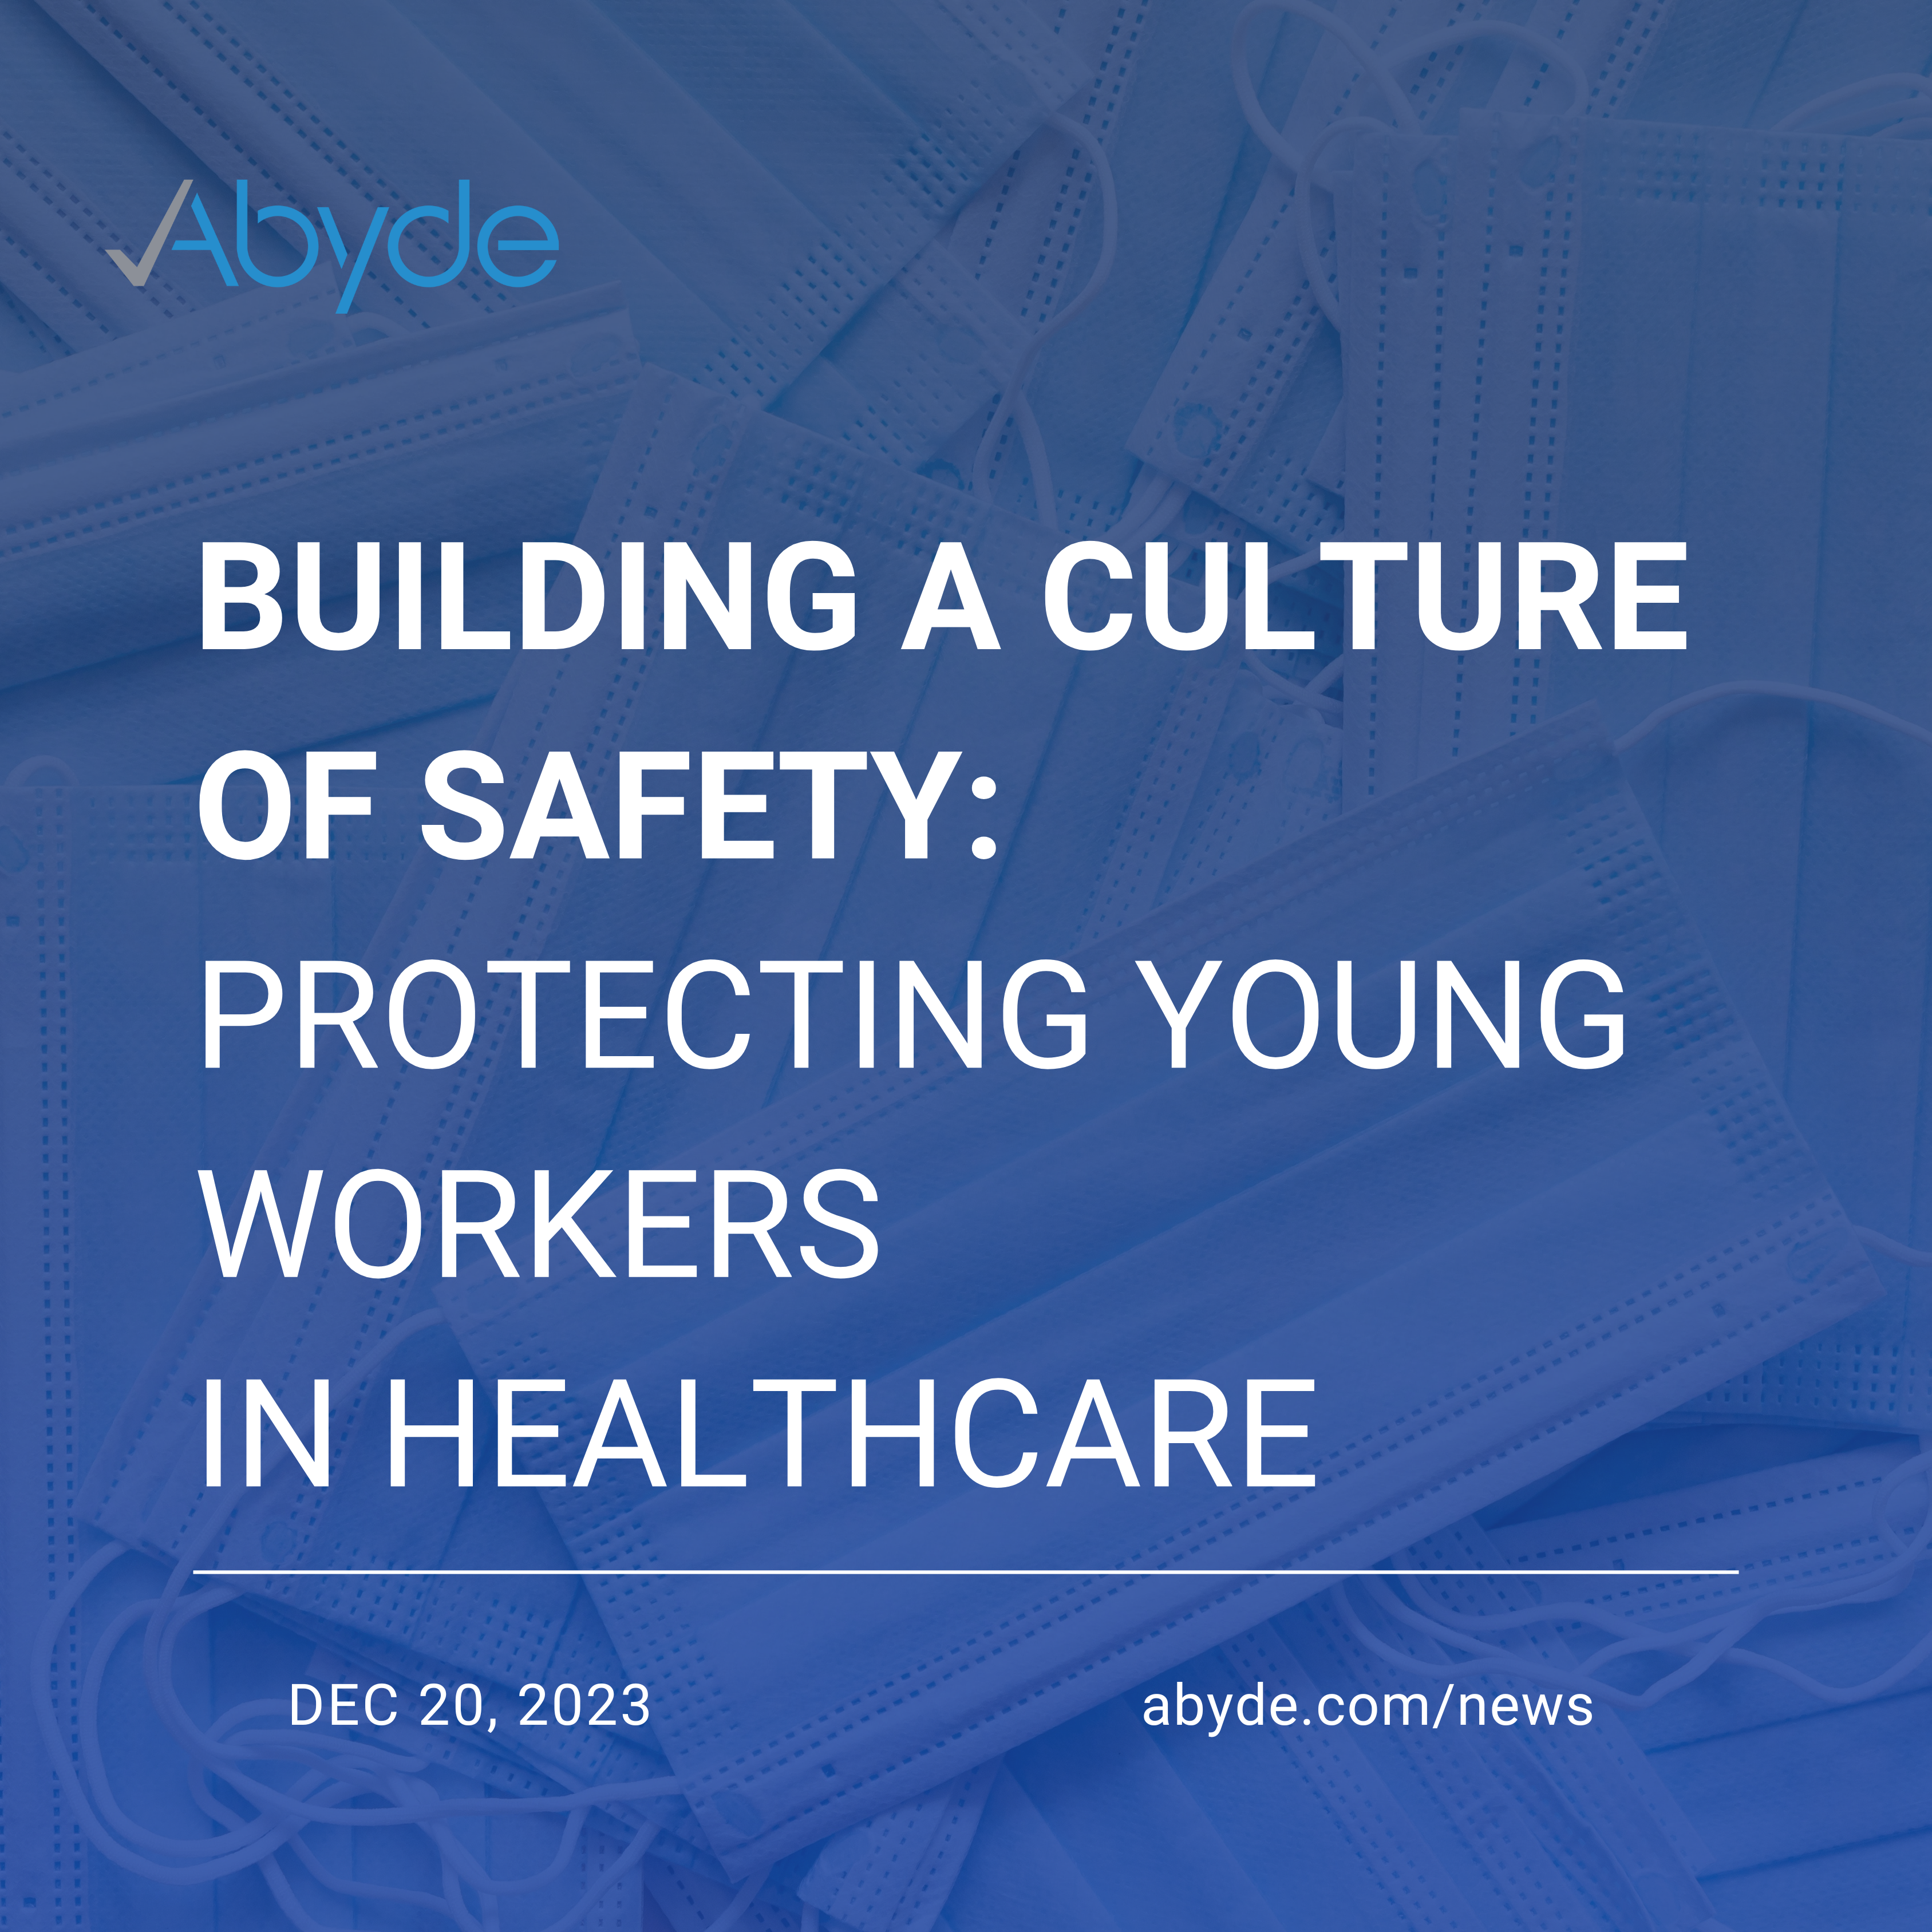 Building a Culture of Safety: Protecting Young Workers in Healthcare